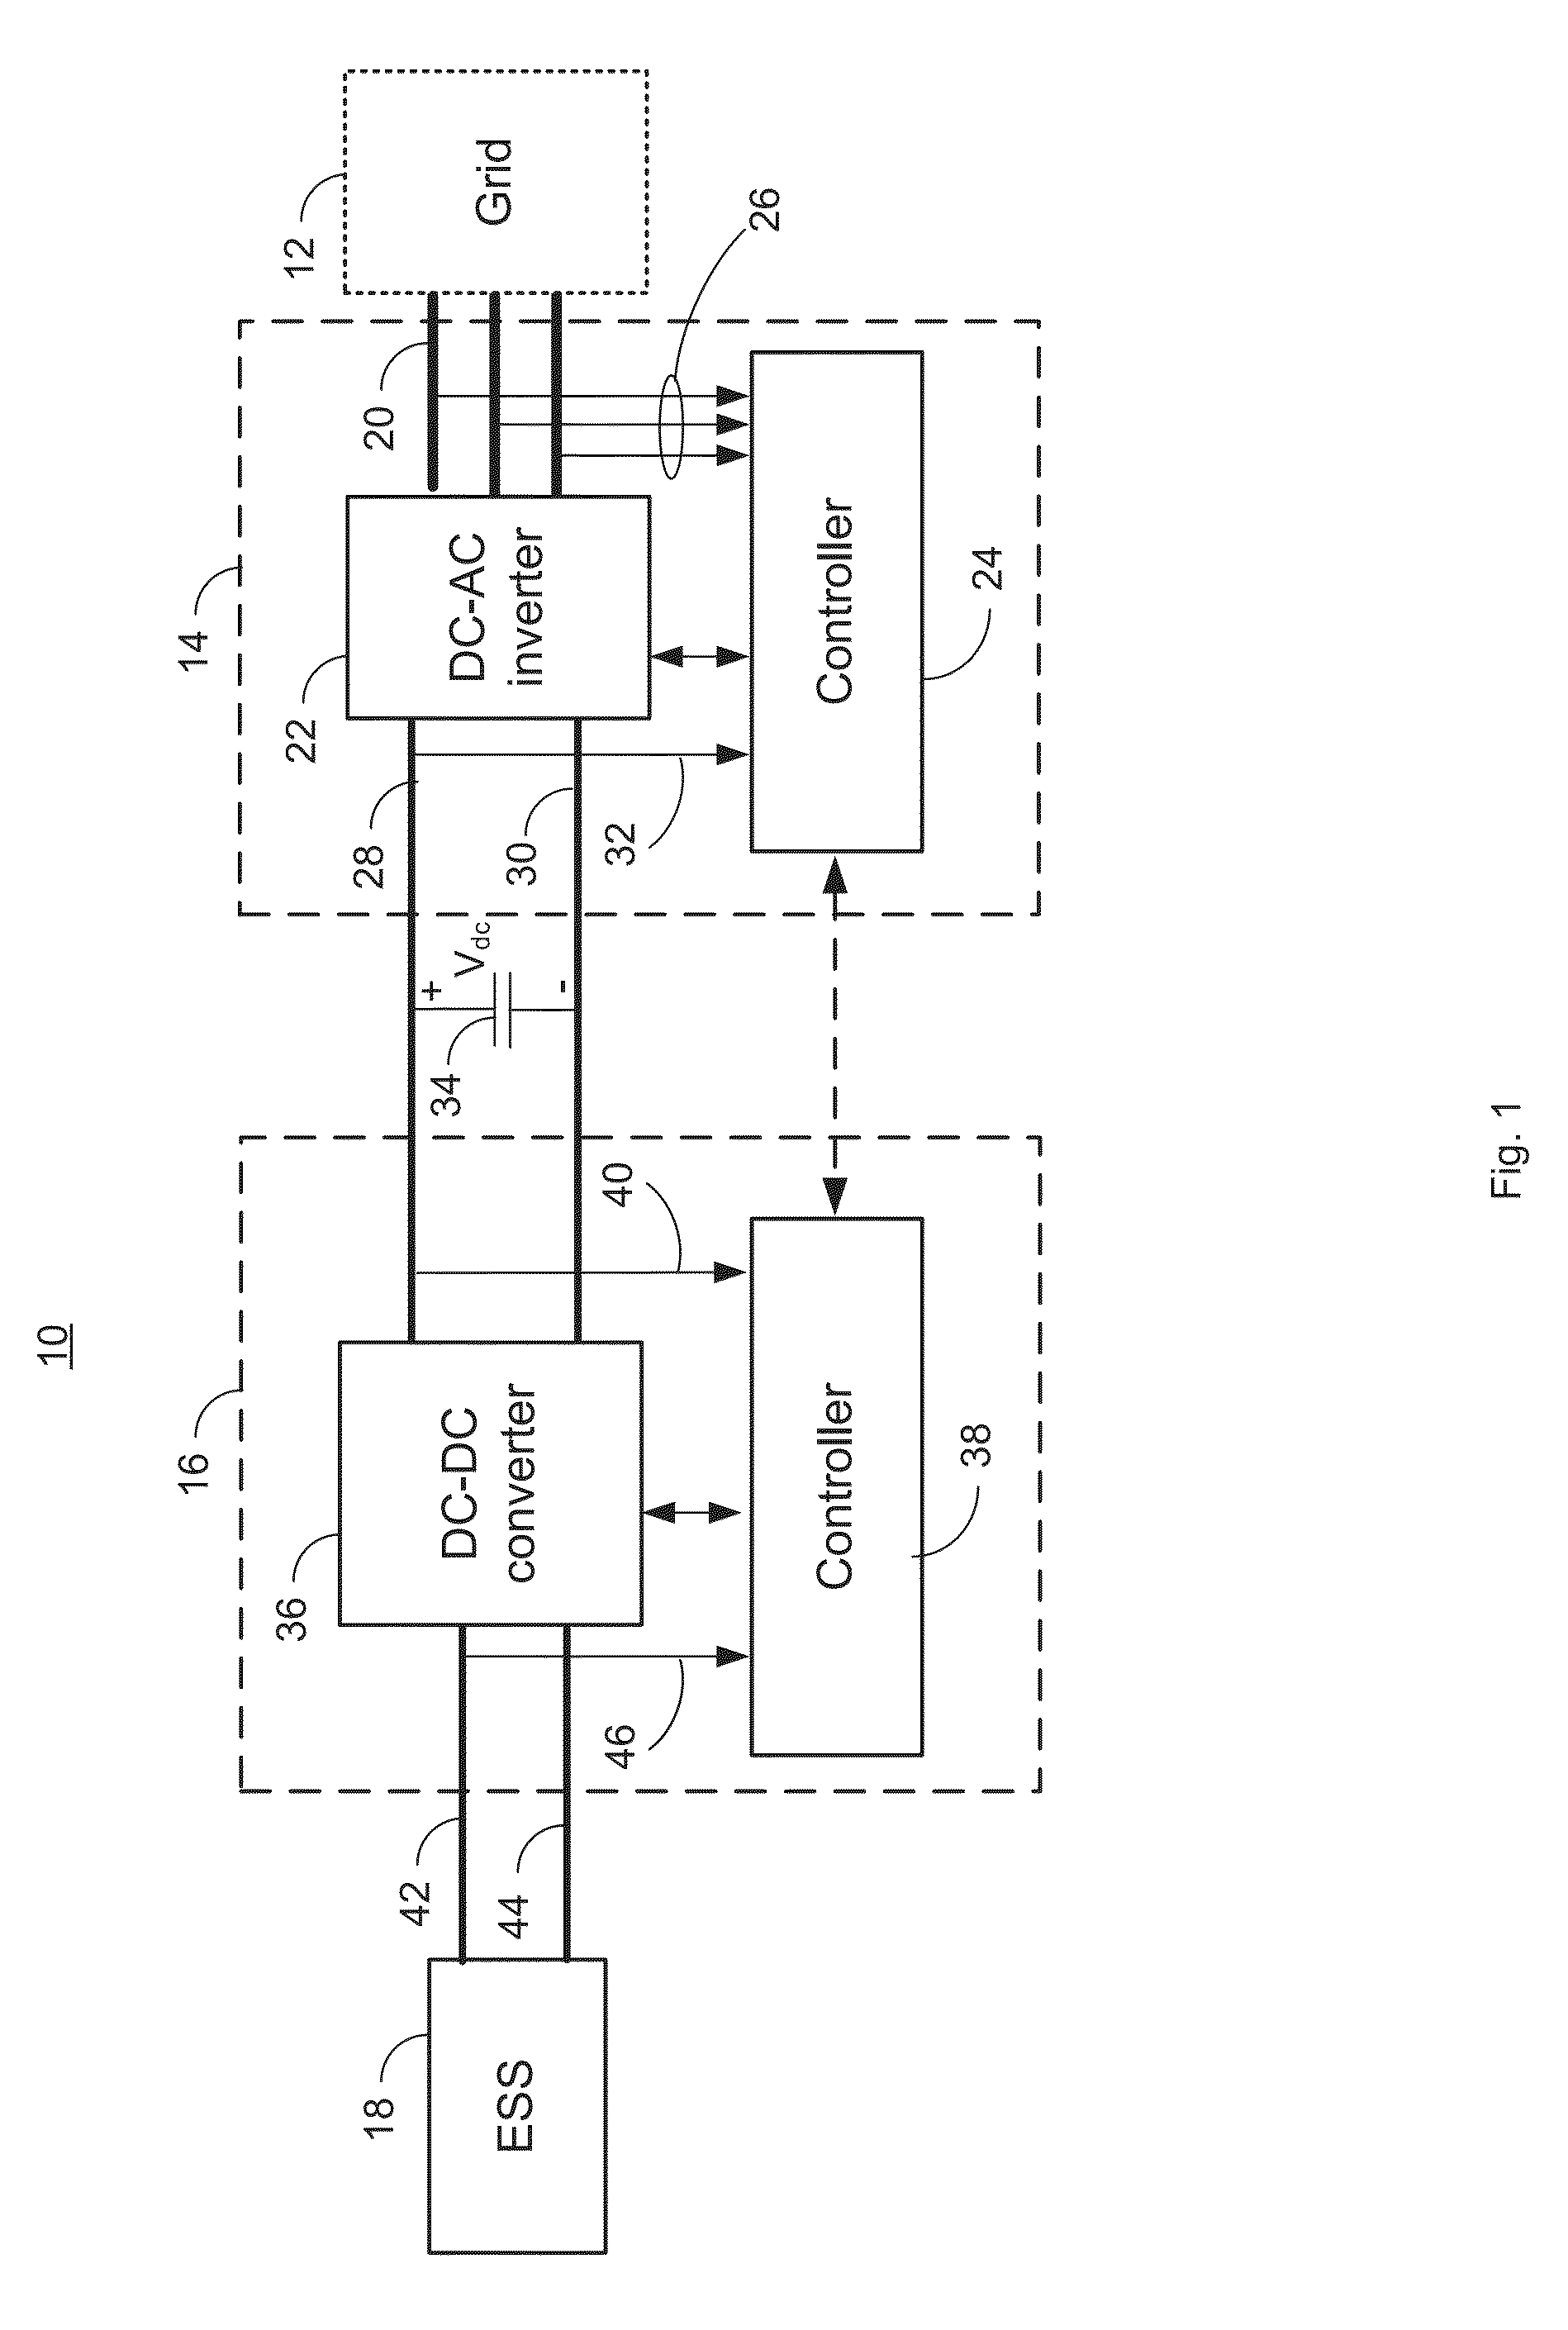 Control of Energy Storage System Inverter System in a Microgrid Application